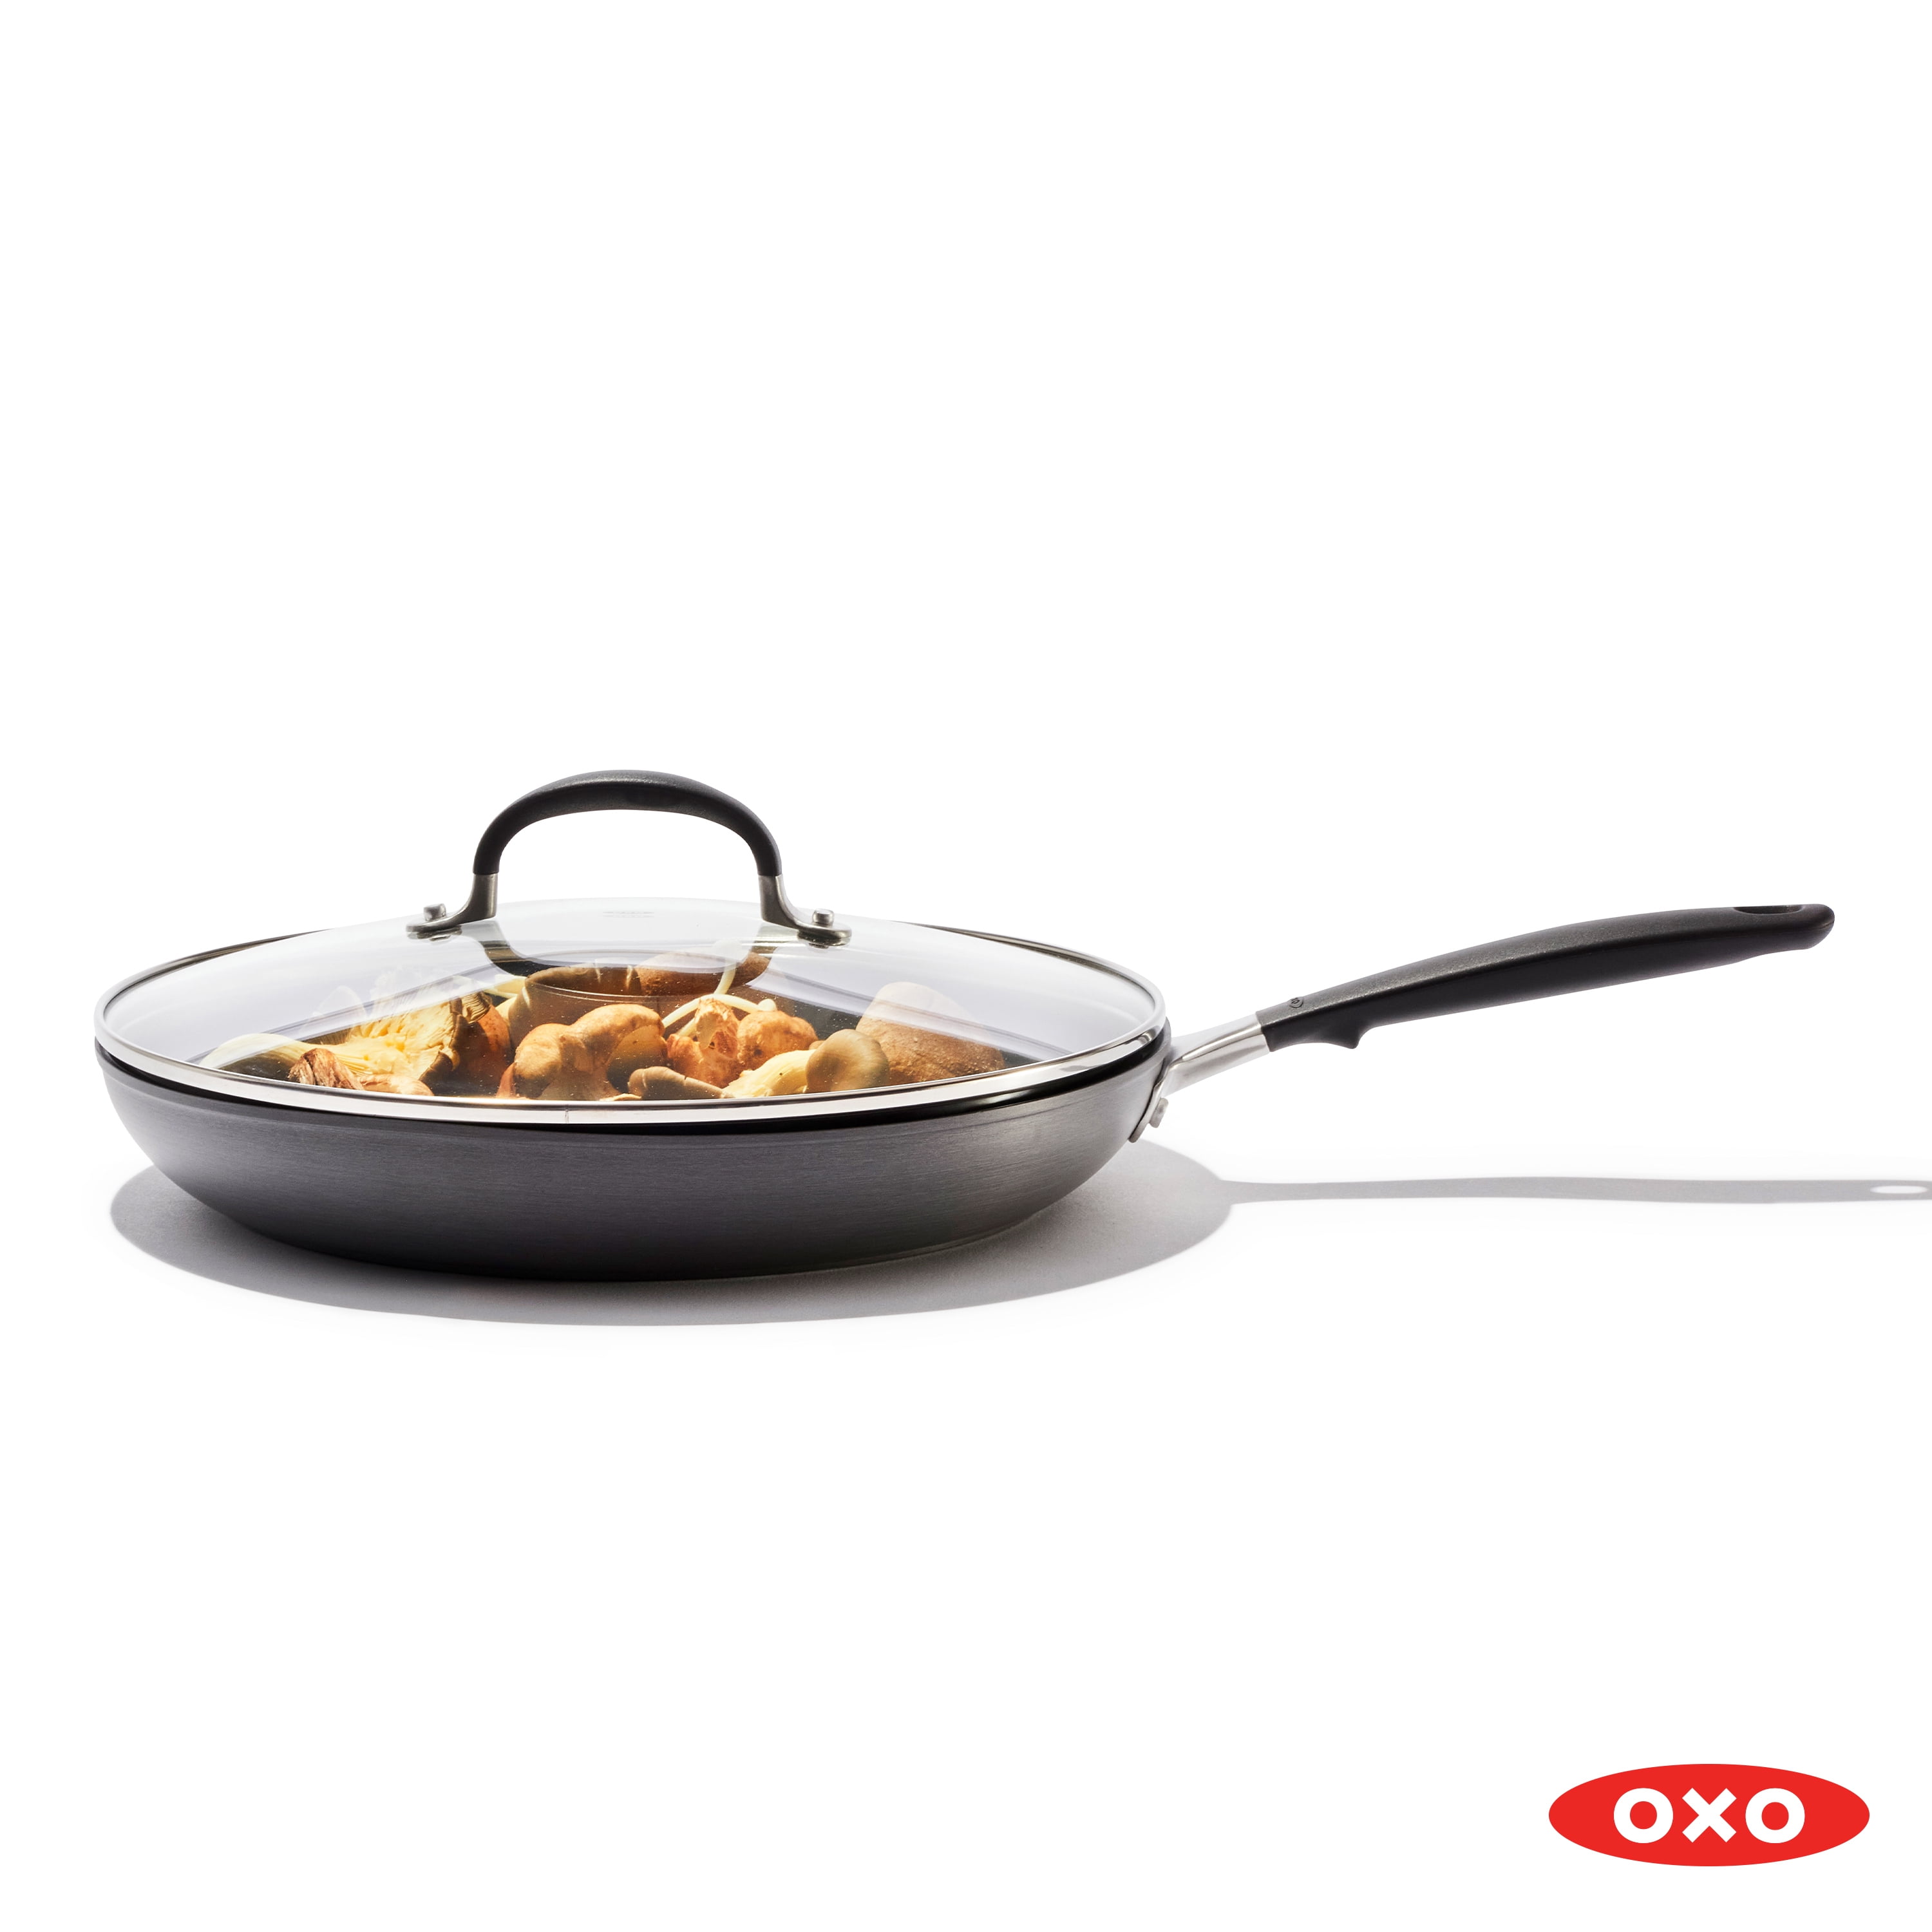 OXO Good Grips Non-Stick Hard Anodized 12-Inch FrypanOven Safe